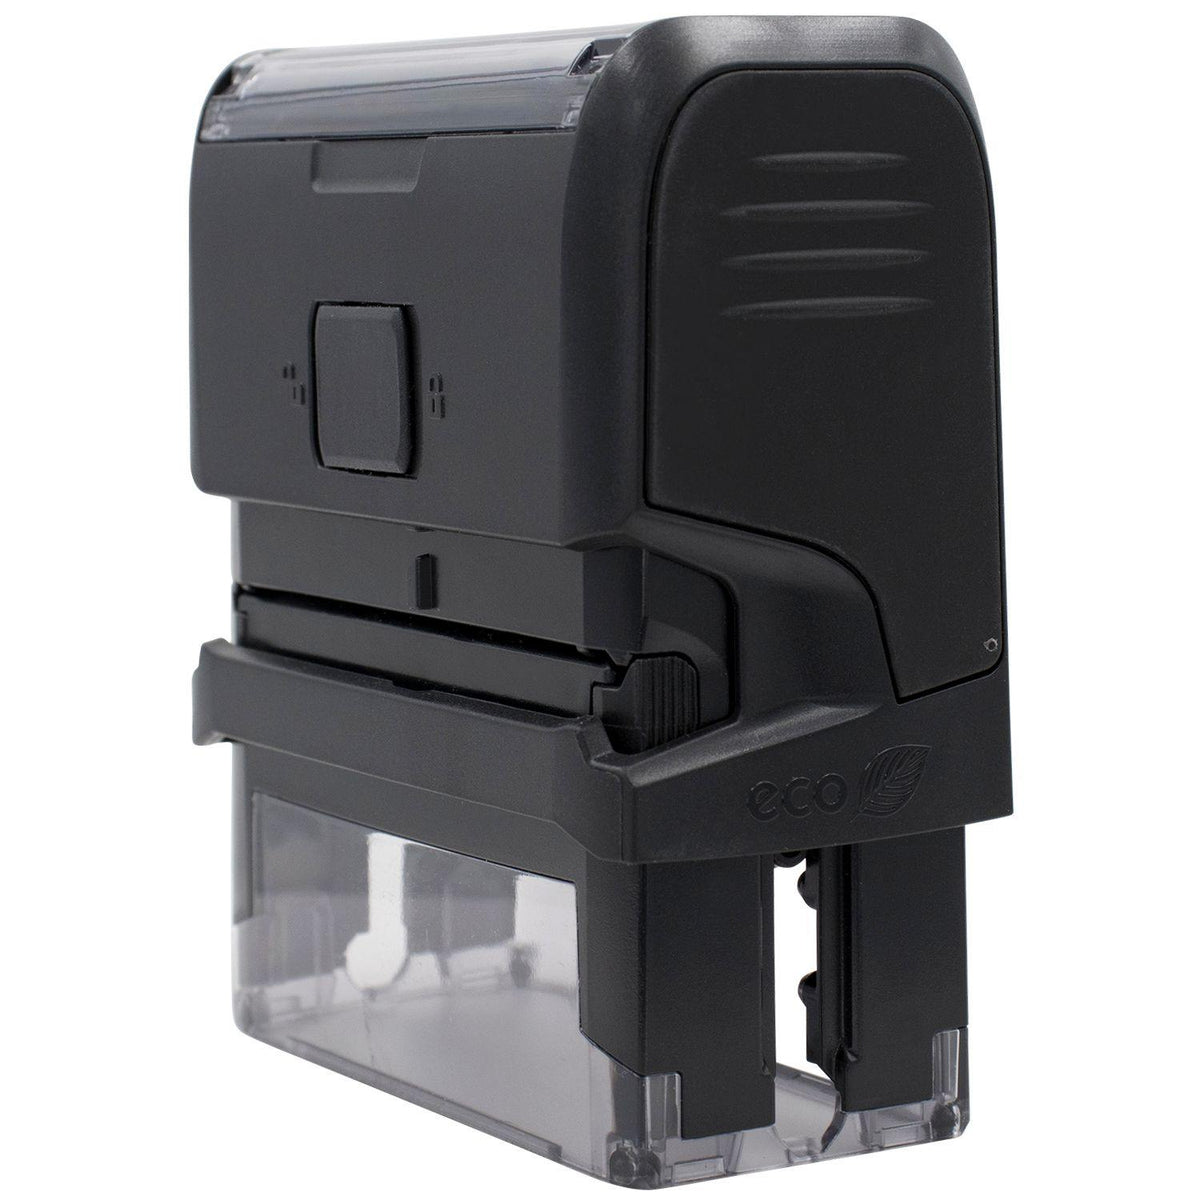 Self Inking Evidence Stamp - Engineer Seal Stamps - Brand_Trodat, Impression Size_Small, Stamp Type_Self-Inking Stamp, Type of Use_Legal